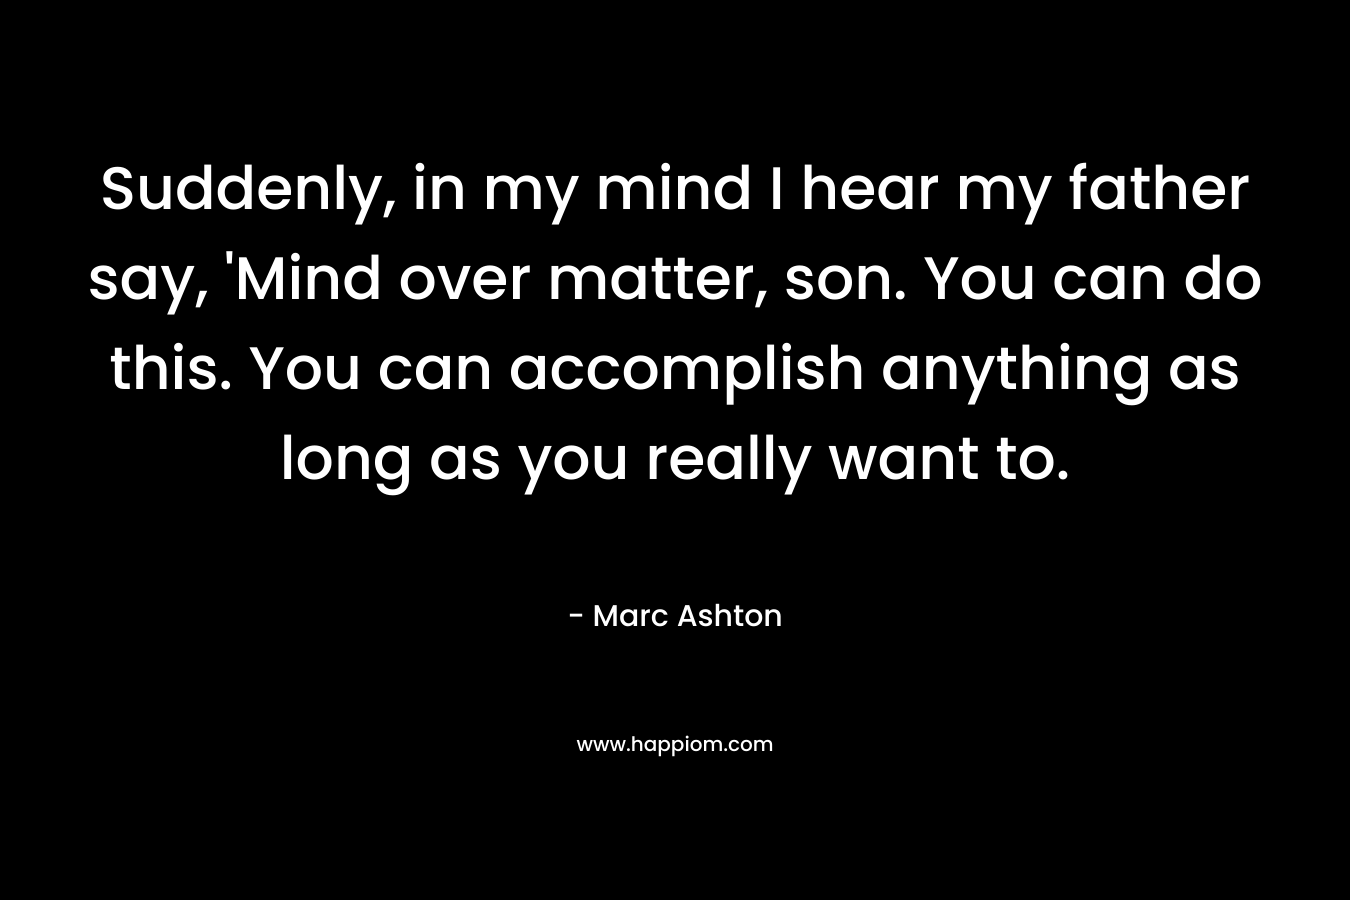 Suddenly, in my mind I hear my father say, ‘Mind over matter, son. You can do this. You can accomplish anything as long as you really want to. – Marc Ashton